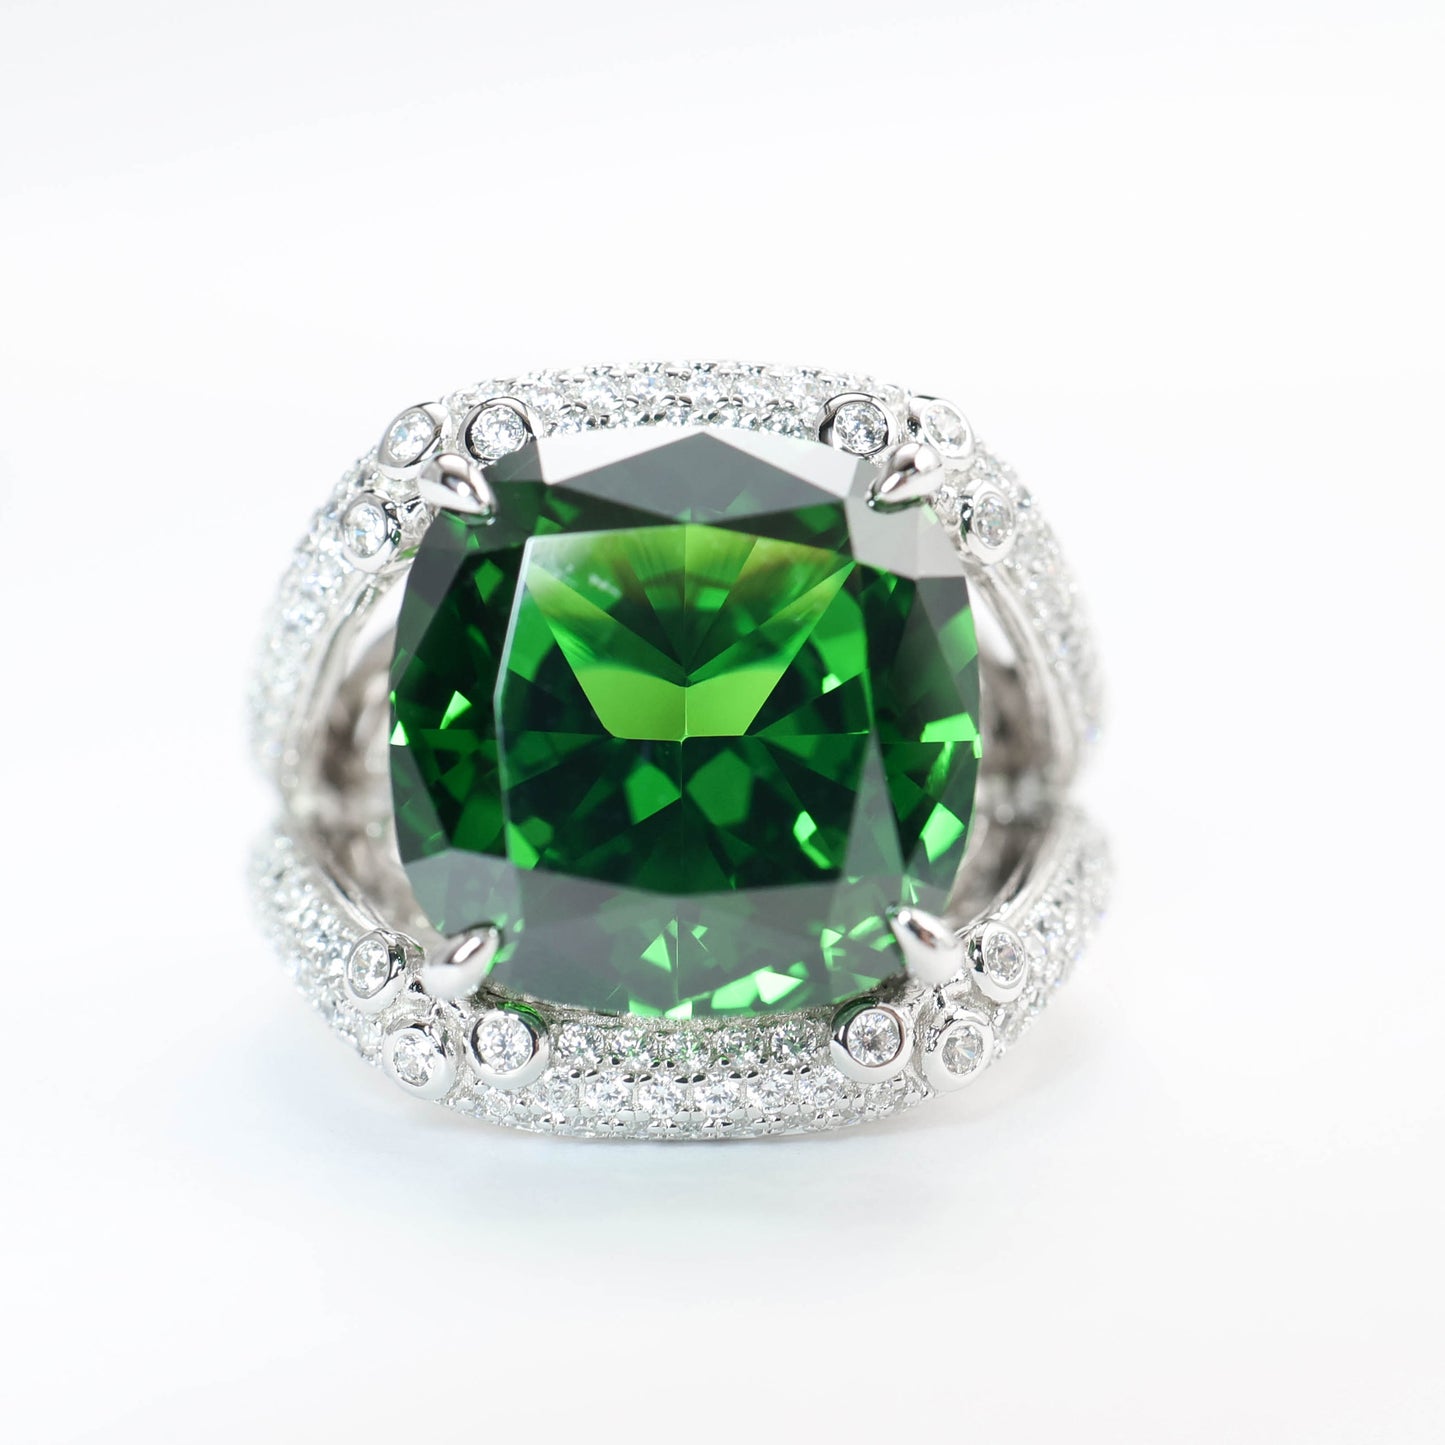 Micro-setting Tsavorite Olive green color Lab created stones 4 prong detailed ring, sterling silver. (18 carat)